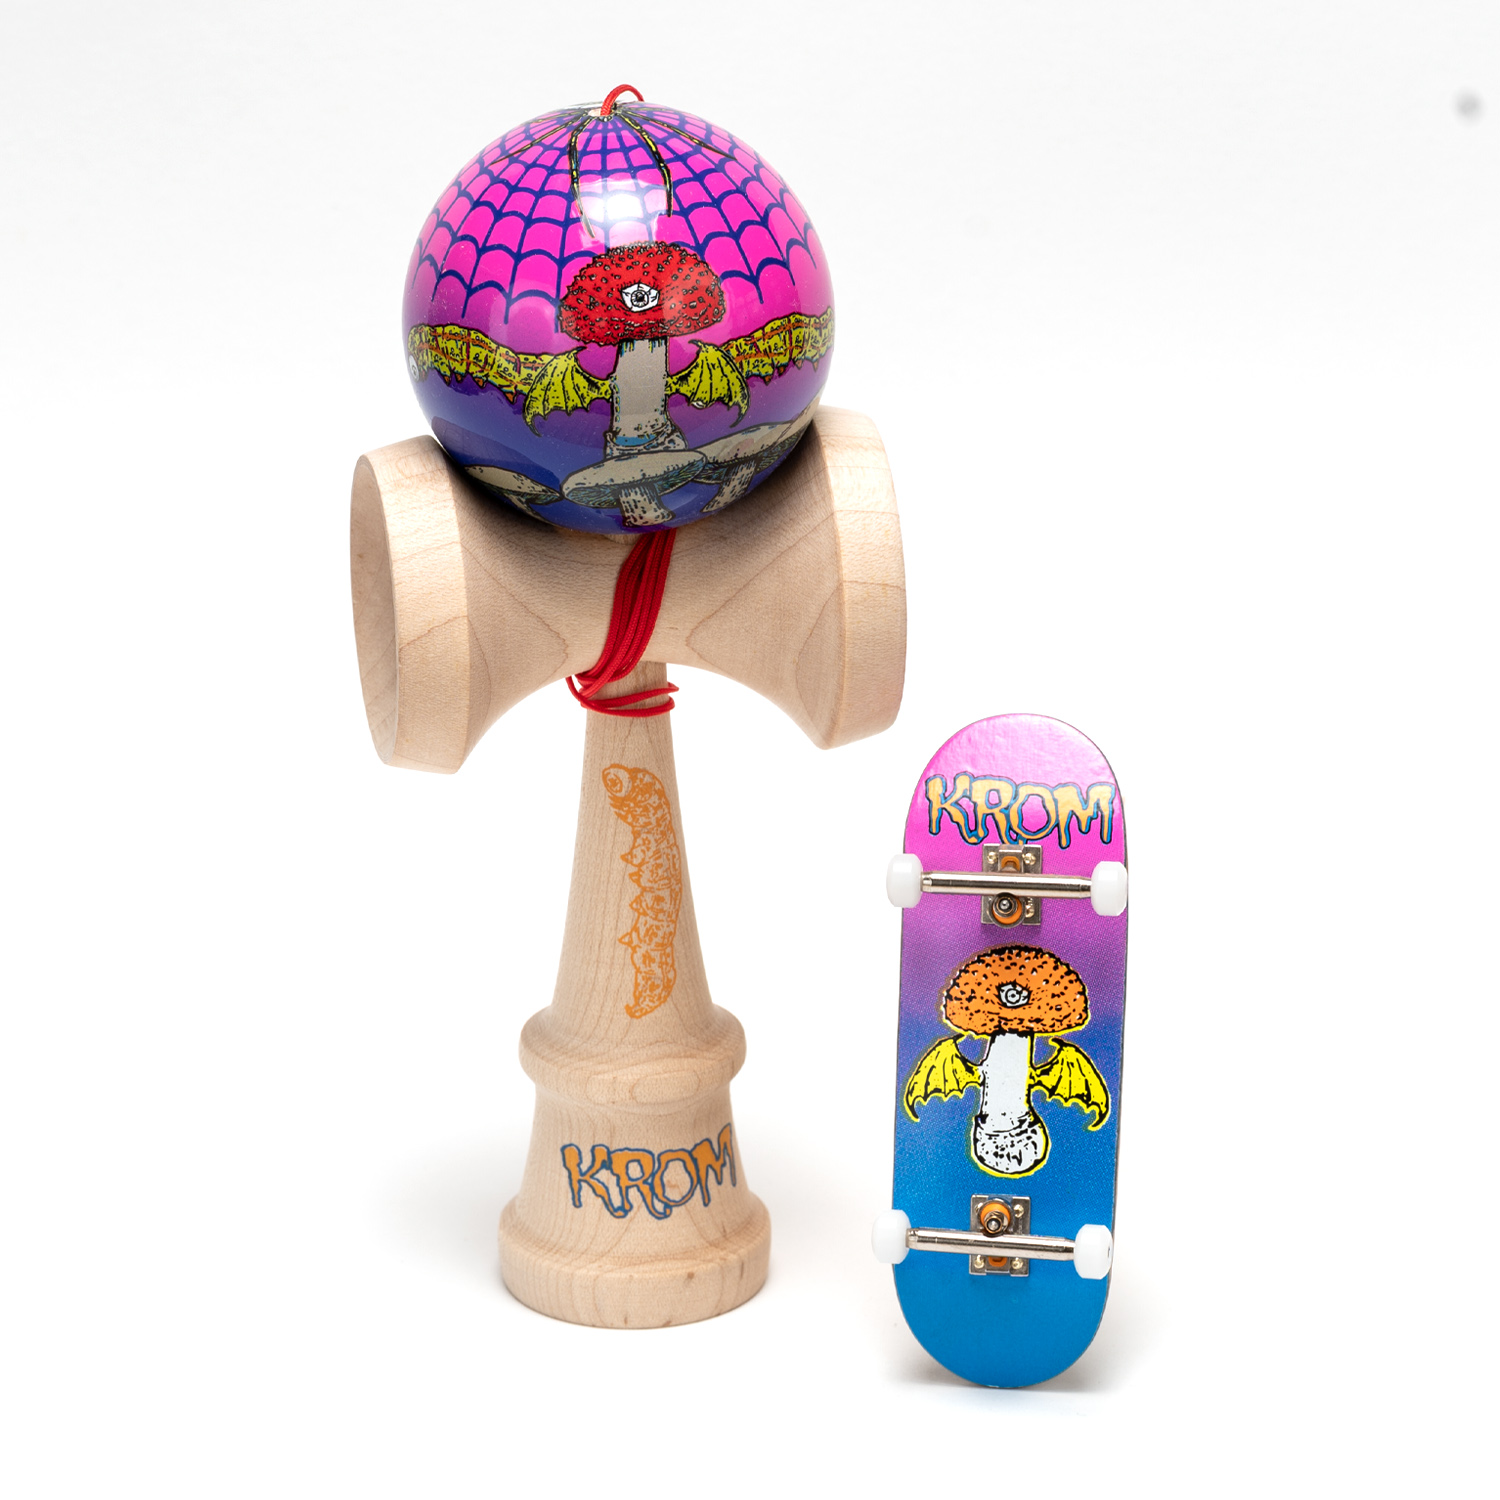 Blackriver Fingerboards X Krom Kendama Funeral French - Supposed to Rot  Bundle